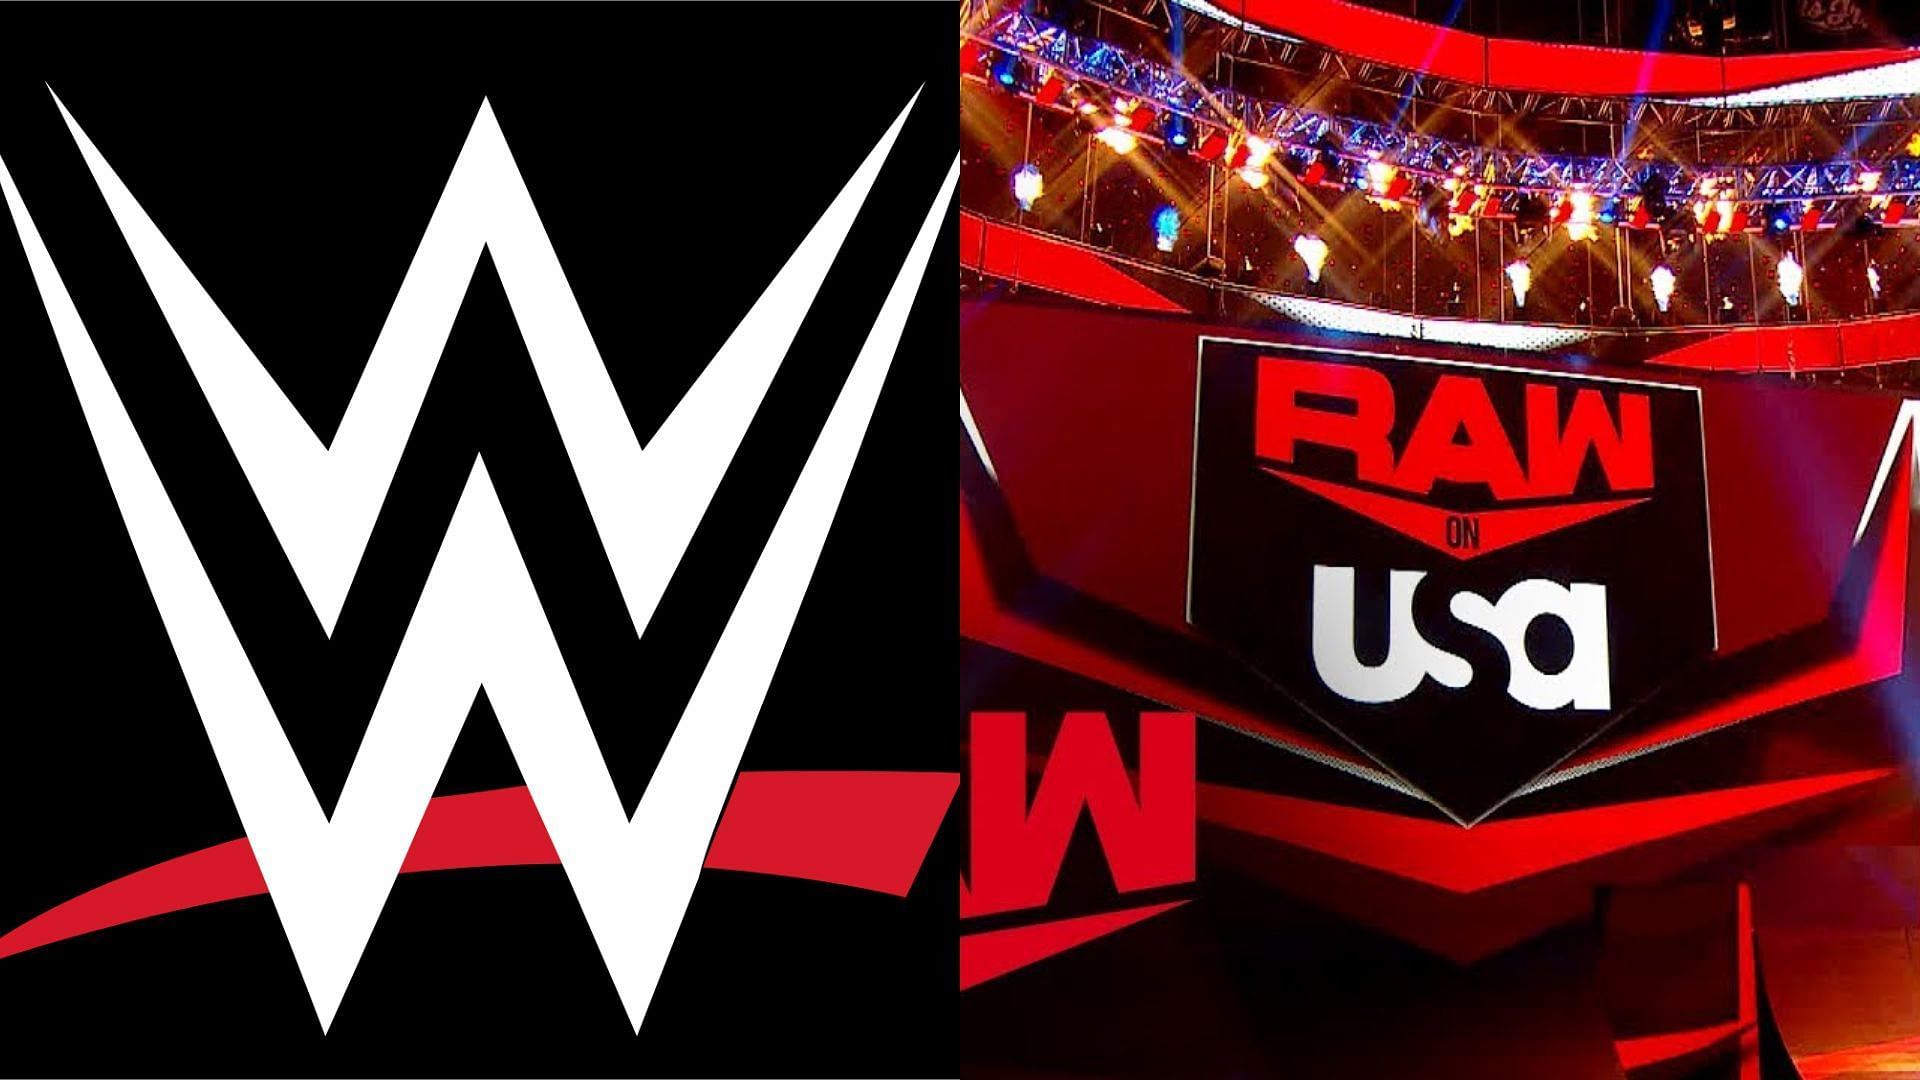 WWE RAW aired an action packed episode this week